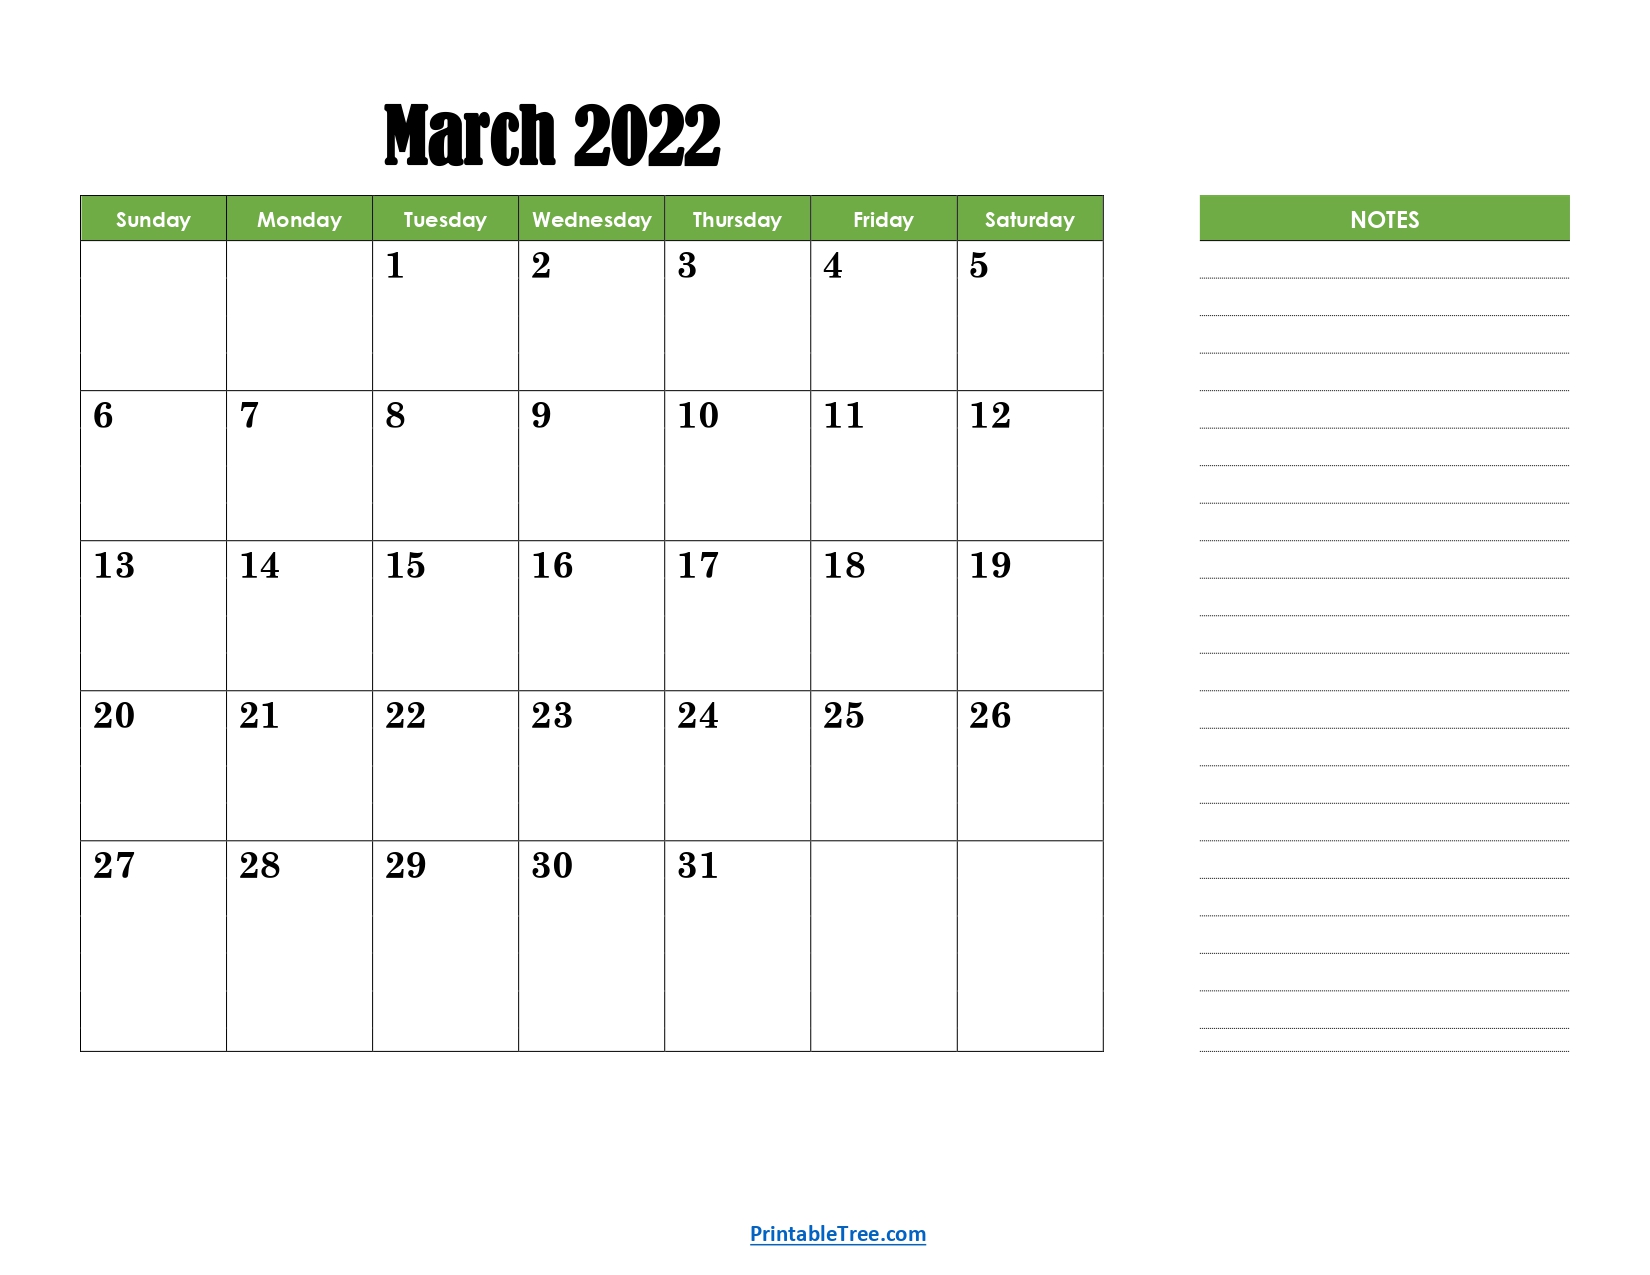 March 2022 Calendar with Green Notes